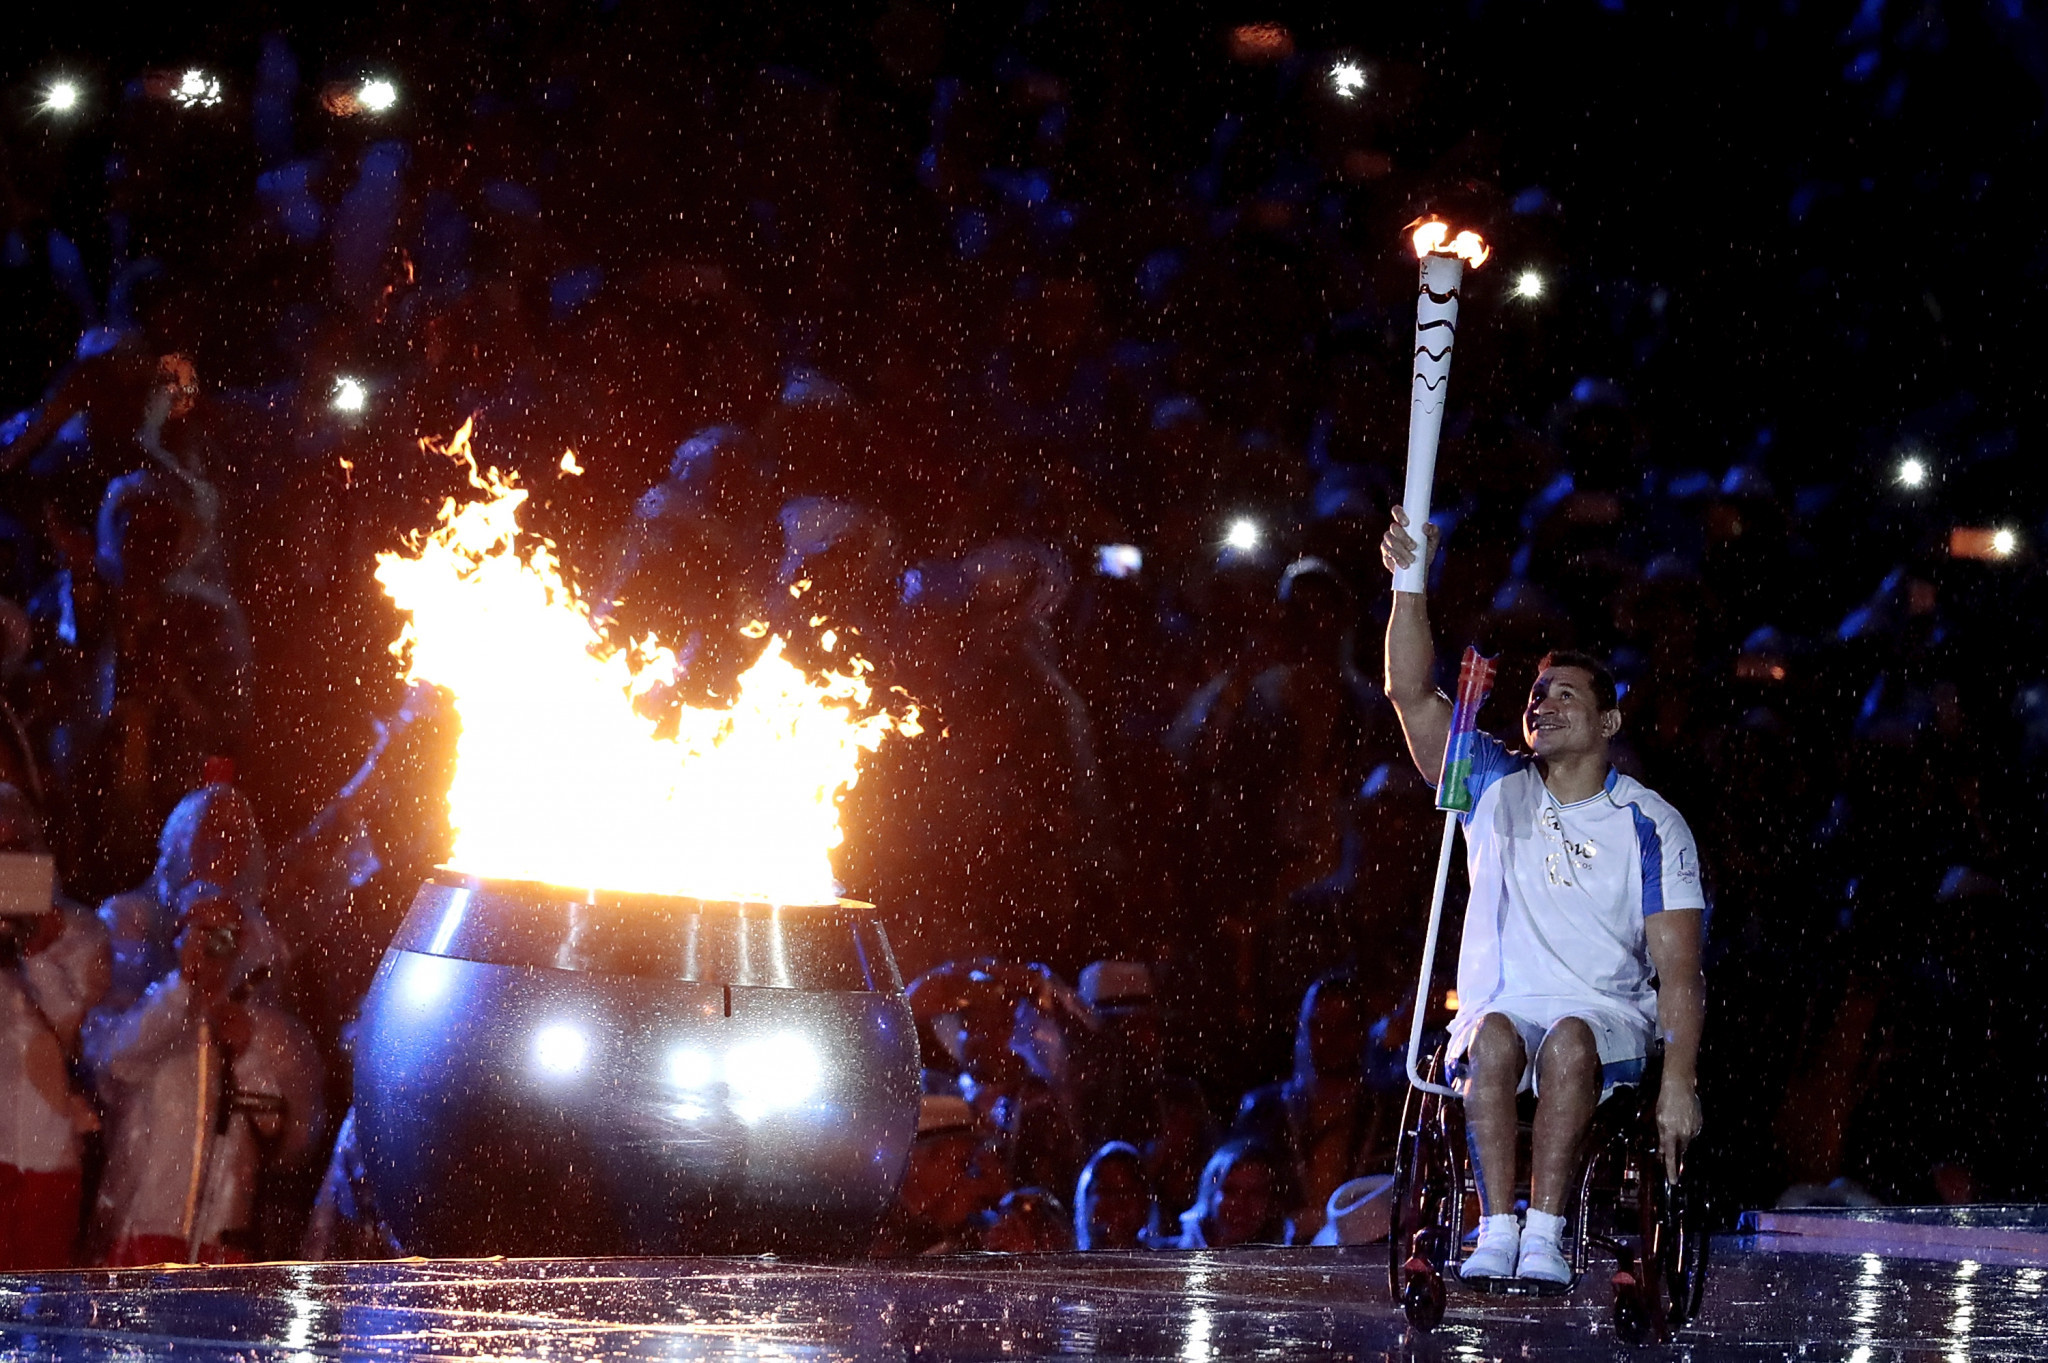 Swimmer, Clodoaldo Silva, of Brazil lights the Paralympic flame during the Opening Ceremony of the Rio 2016 Paralympic Games ©Getty Images